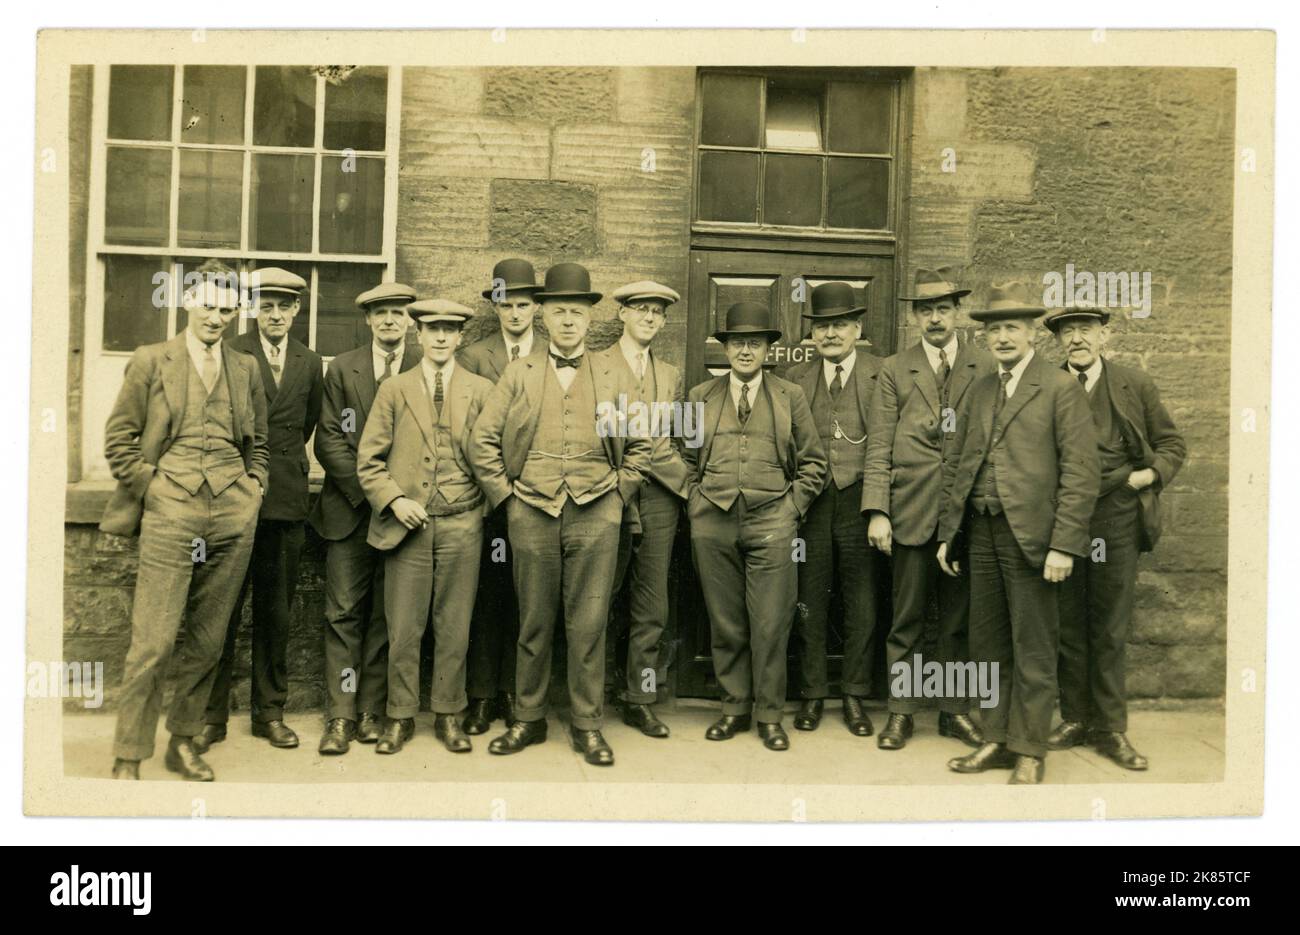 Original 1920's era postcard, sepia tinted in places, of office staff, group of working class men standing outside their office, lots of characters, wearing suits and assortment of hats - flat caps, bowler and Homburg hats. Just before the Great Depression started in 1929. Dated April 1928, U.K. Stock Photo